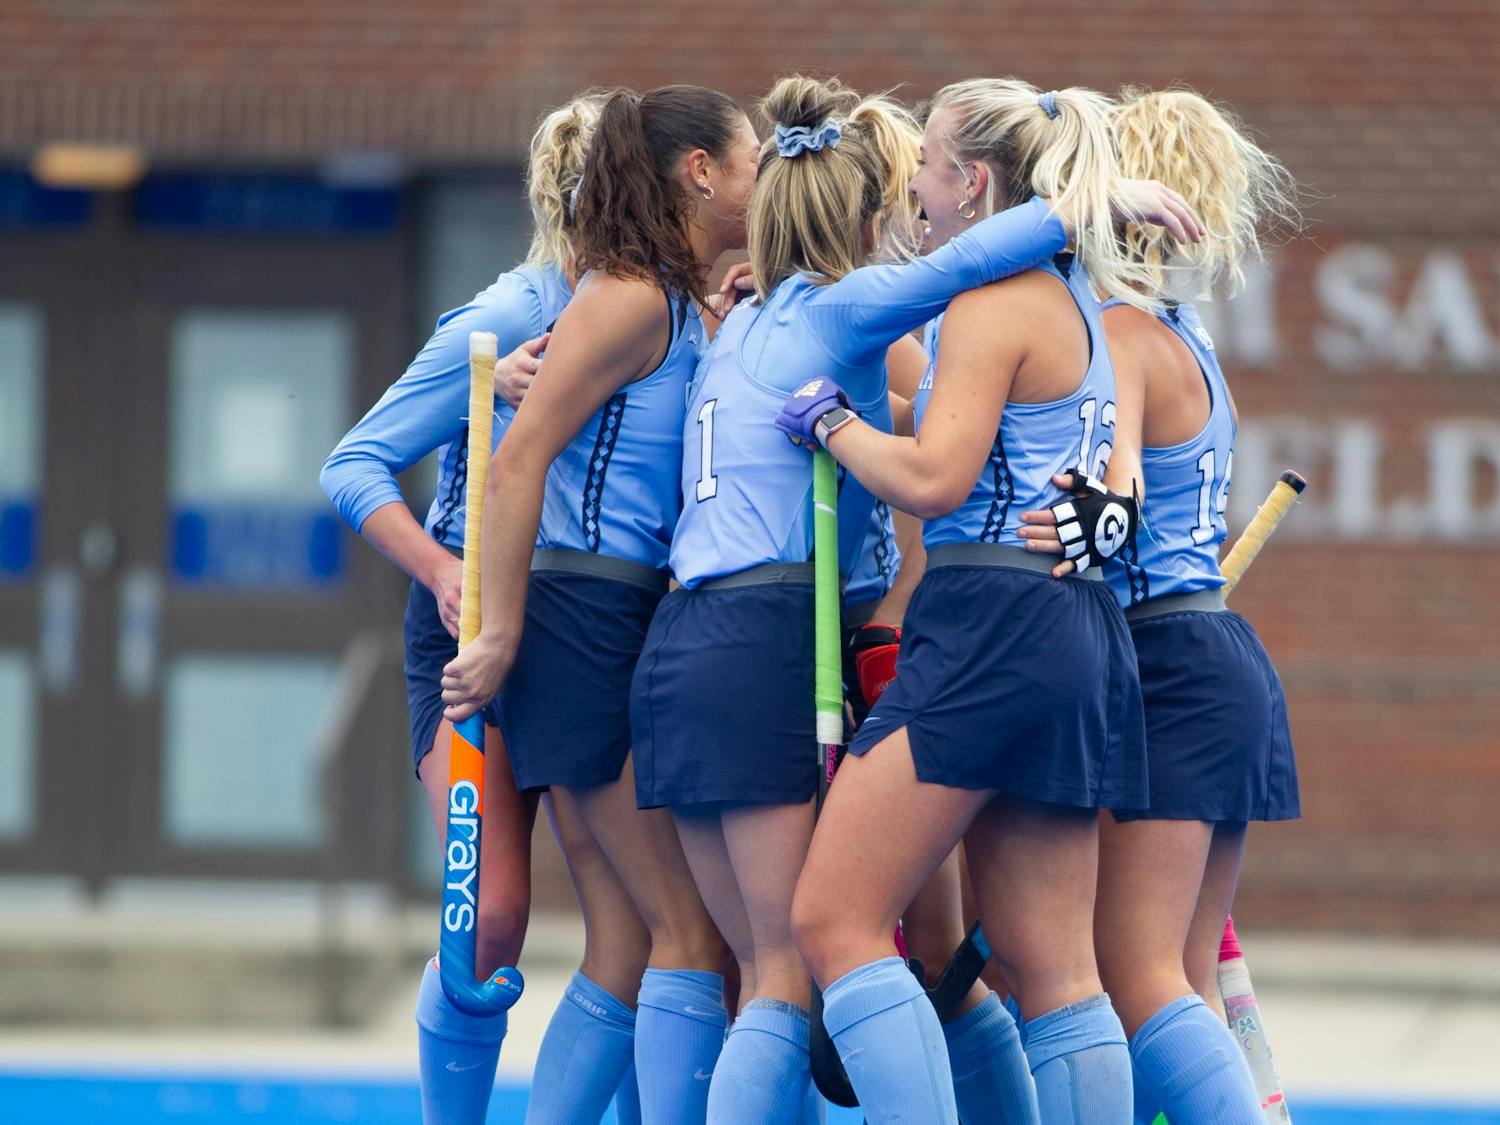 UNC Field Hockey meets on the field in celebration after scoring a point during a game against Duke on Saturday, Oct. 29, 2022, at Jack Katz Stadium in Durham, N.C.